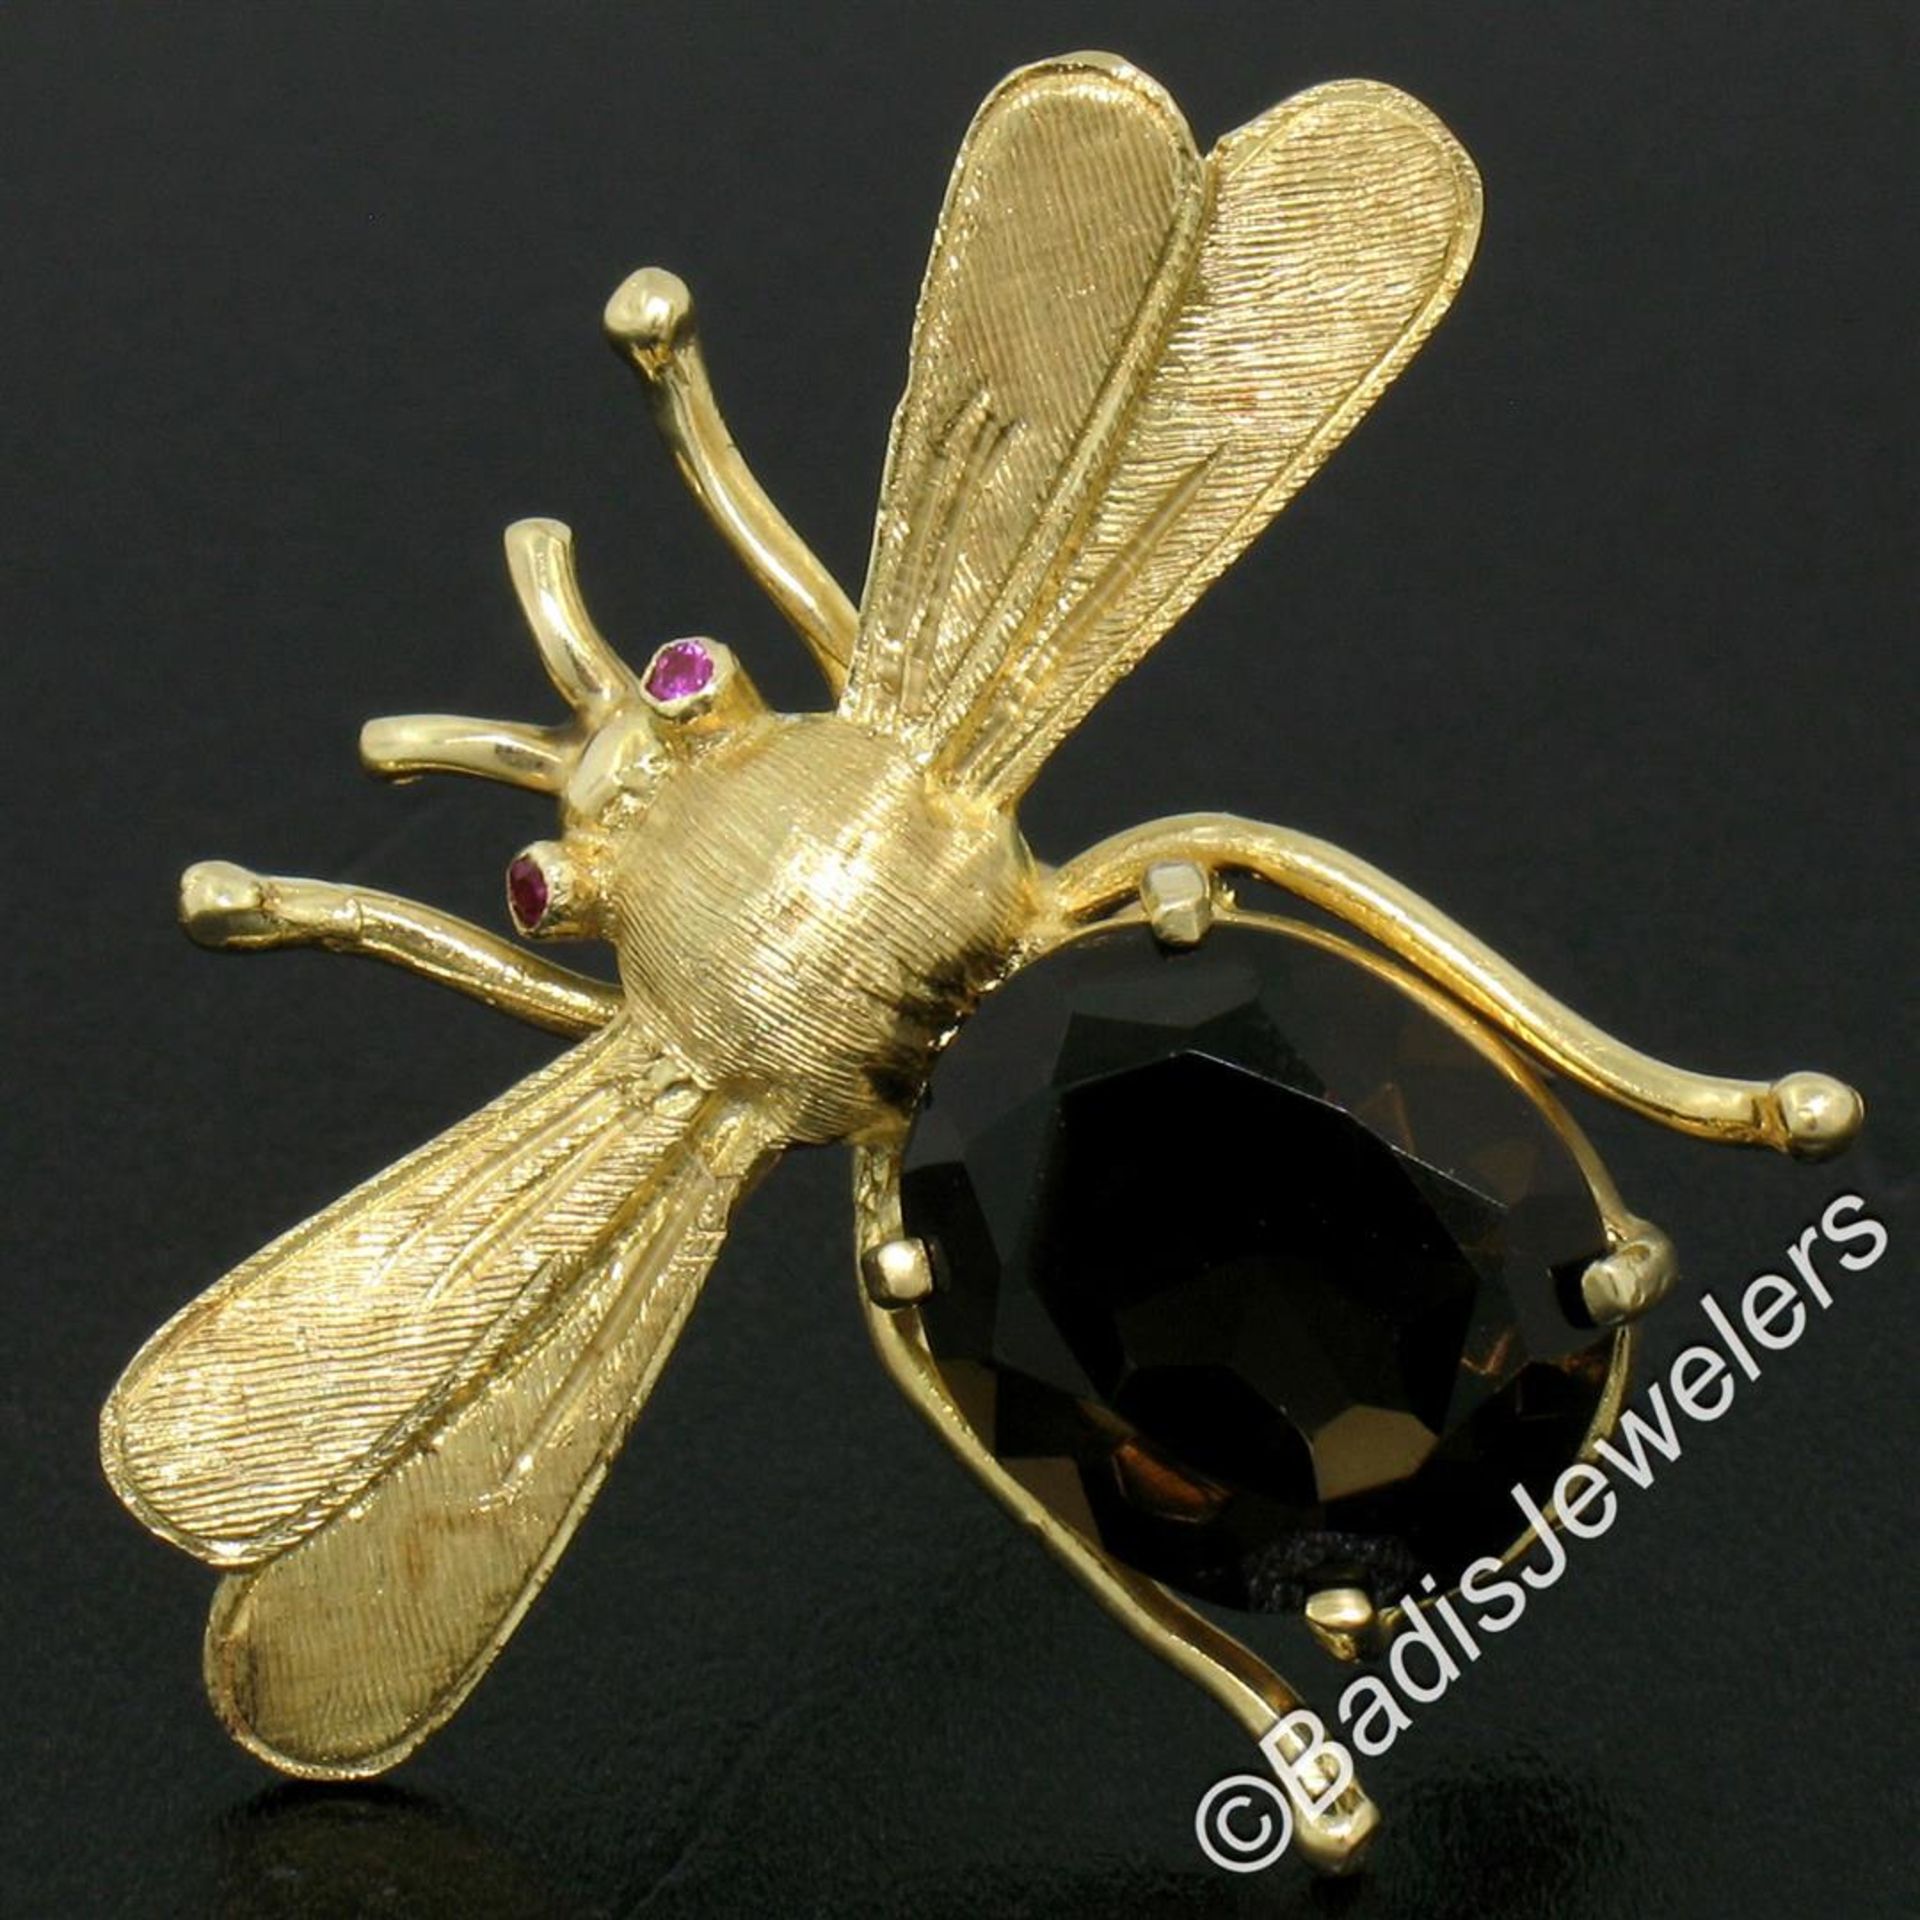 Vintage 14kt Yellow Gold 6.04 ctw Smokey Topaz and Ruby Fly Brooch Pin - Image 4 of 7